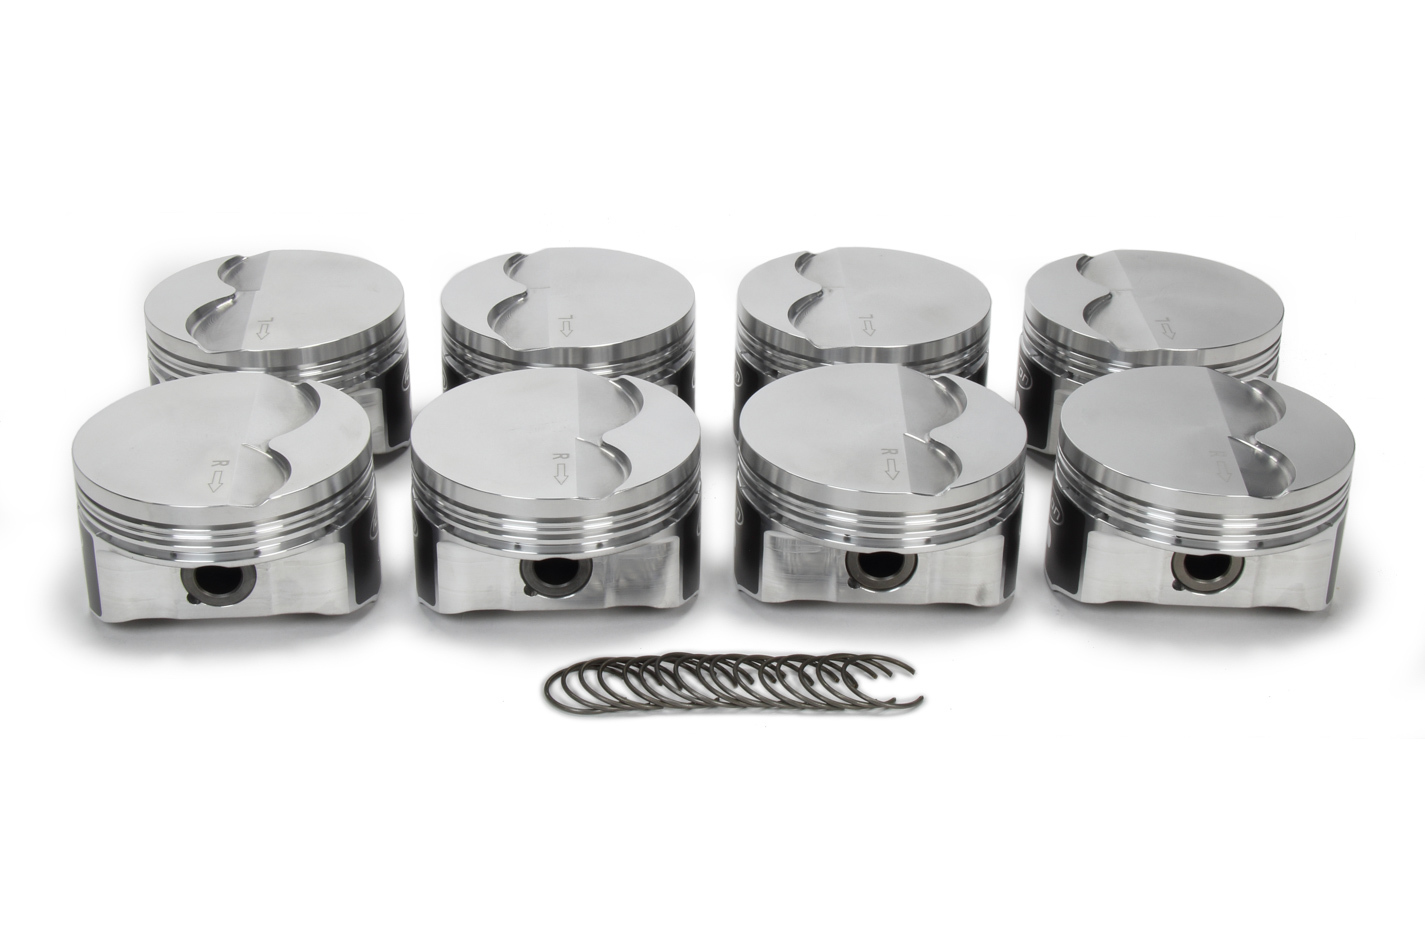 Icon Pistons IC546C.020 Piston, Premium Forged, Forged, 3.800 in Bore, 1.5 x 1.5 x 3.0 mm Ring Groove, Minus 3.00 cc, GM LS-Series, Set of 8